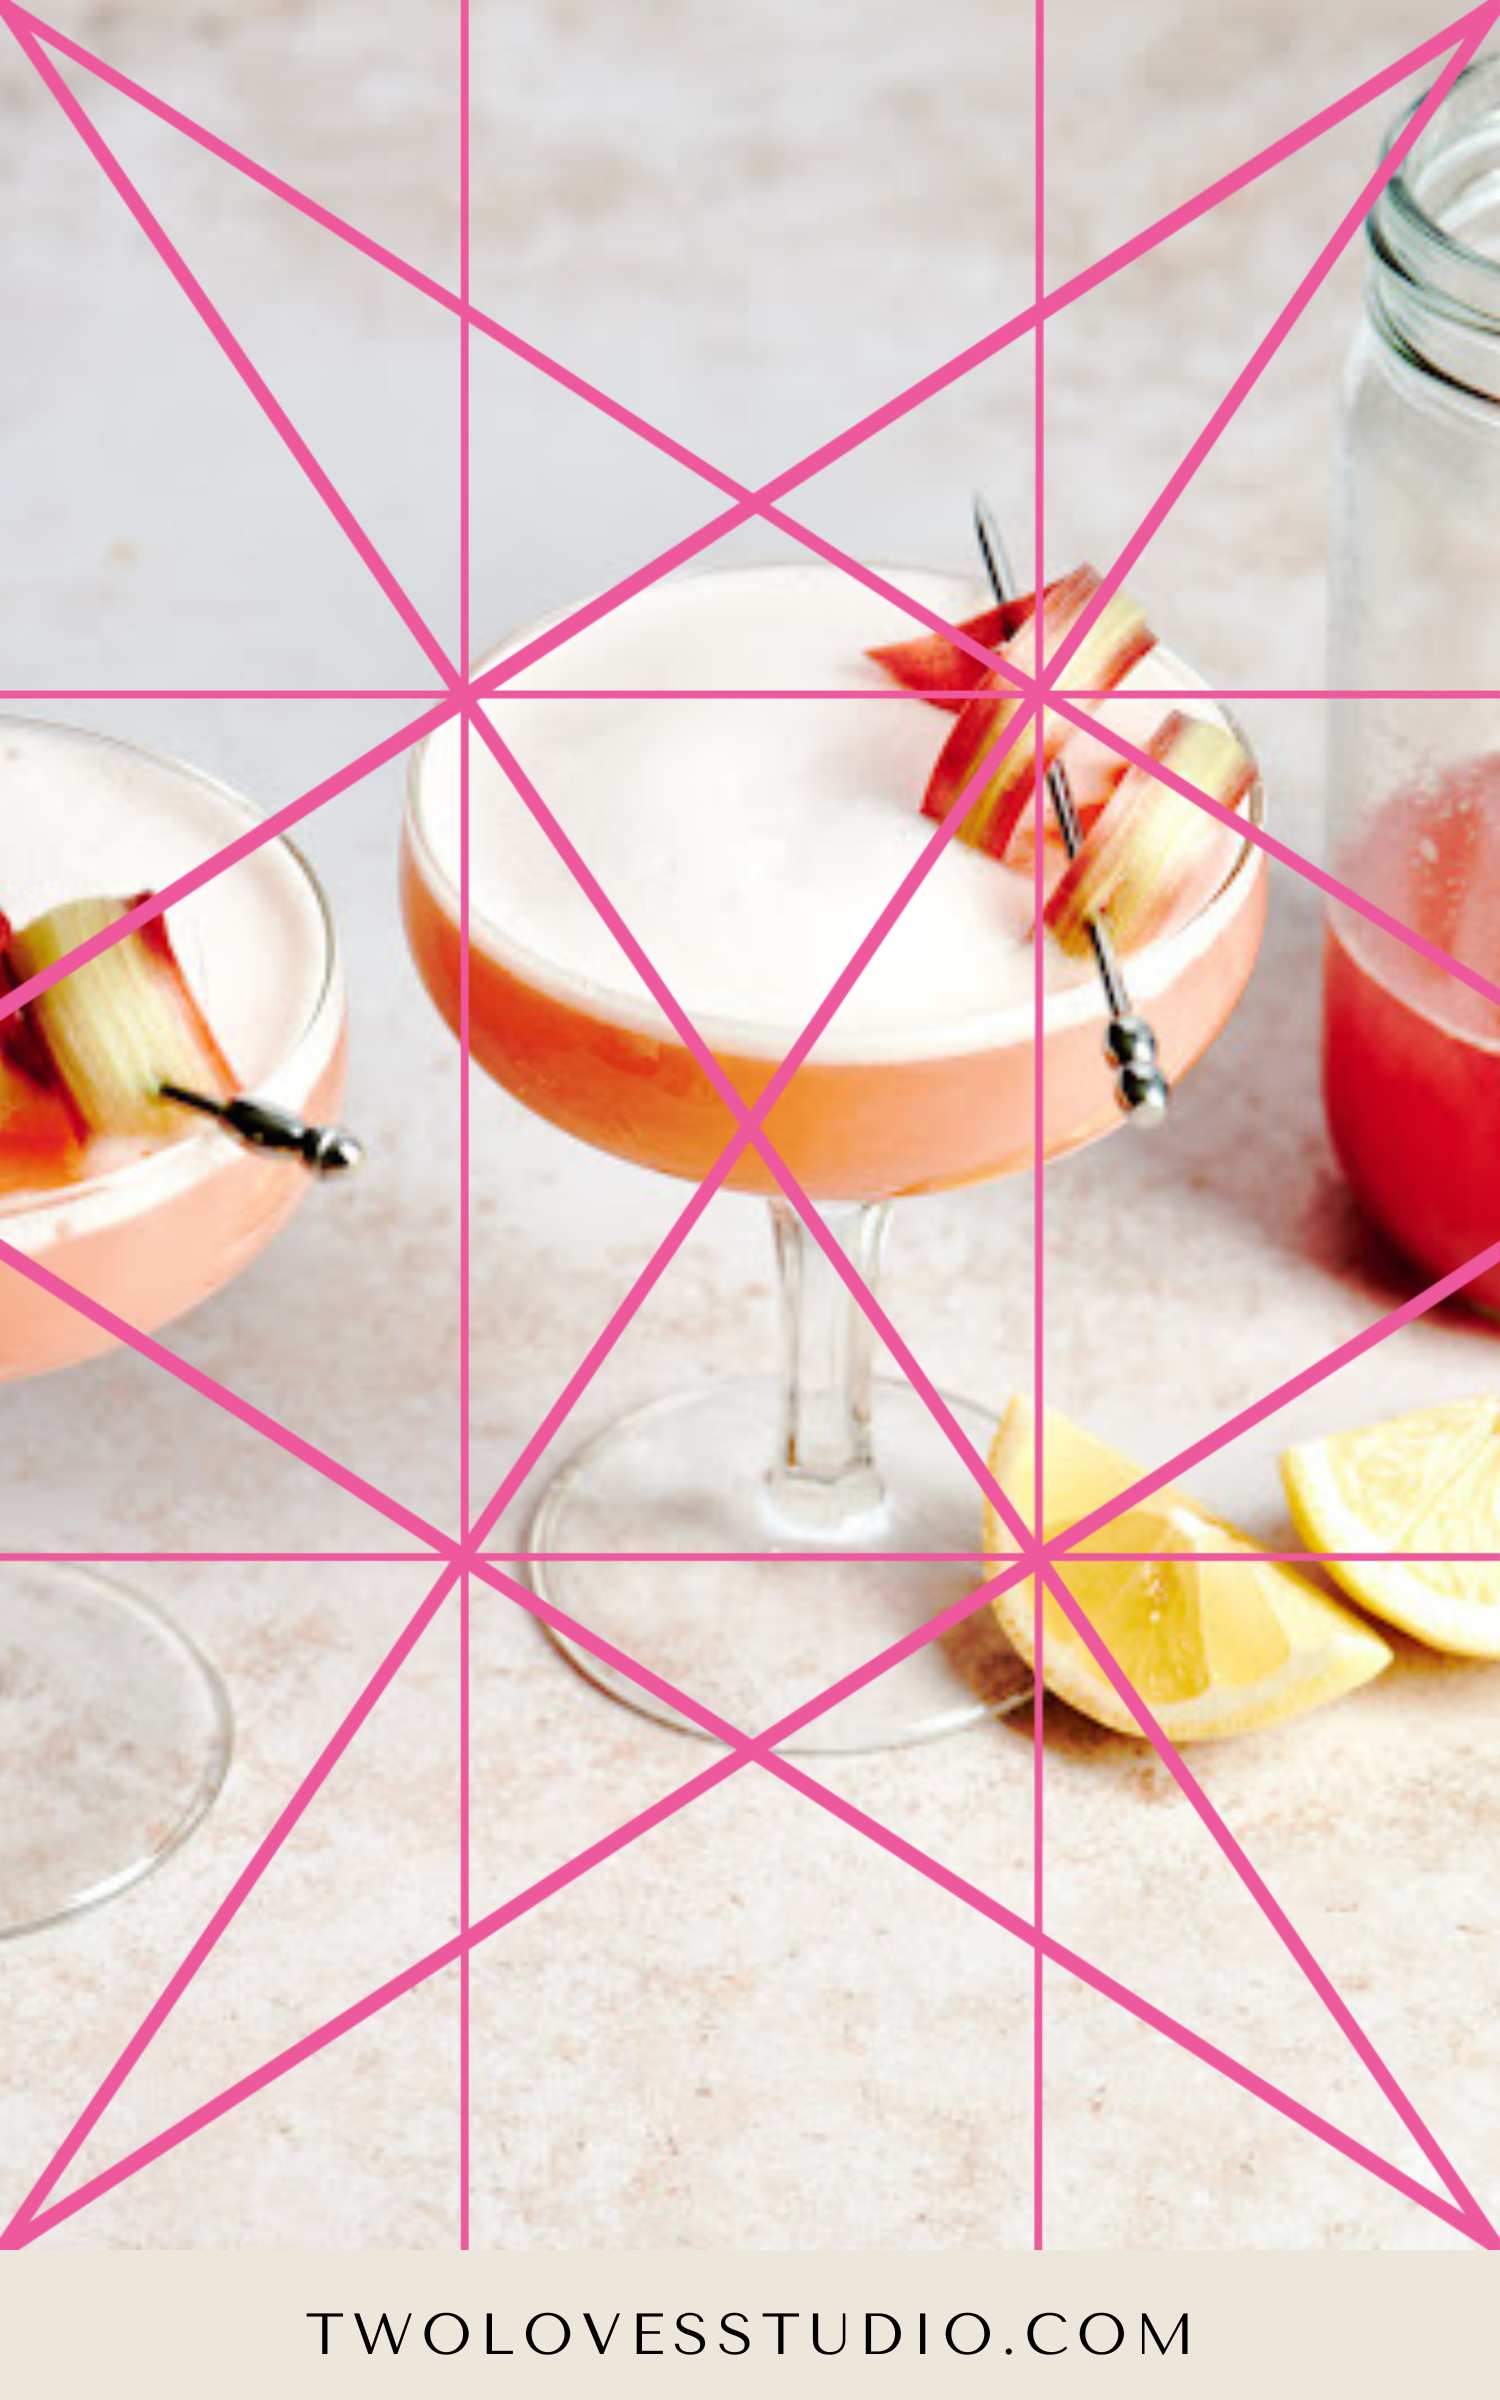 Dynamic symmetry lines across a soft pink background with a rhubarb cocktail and lemon wedges.  